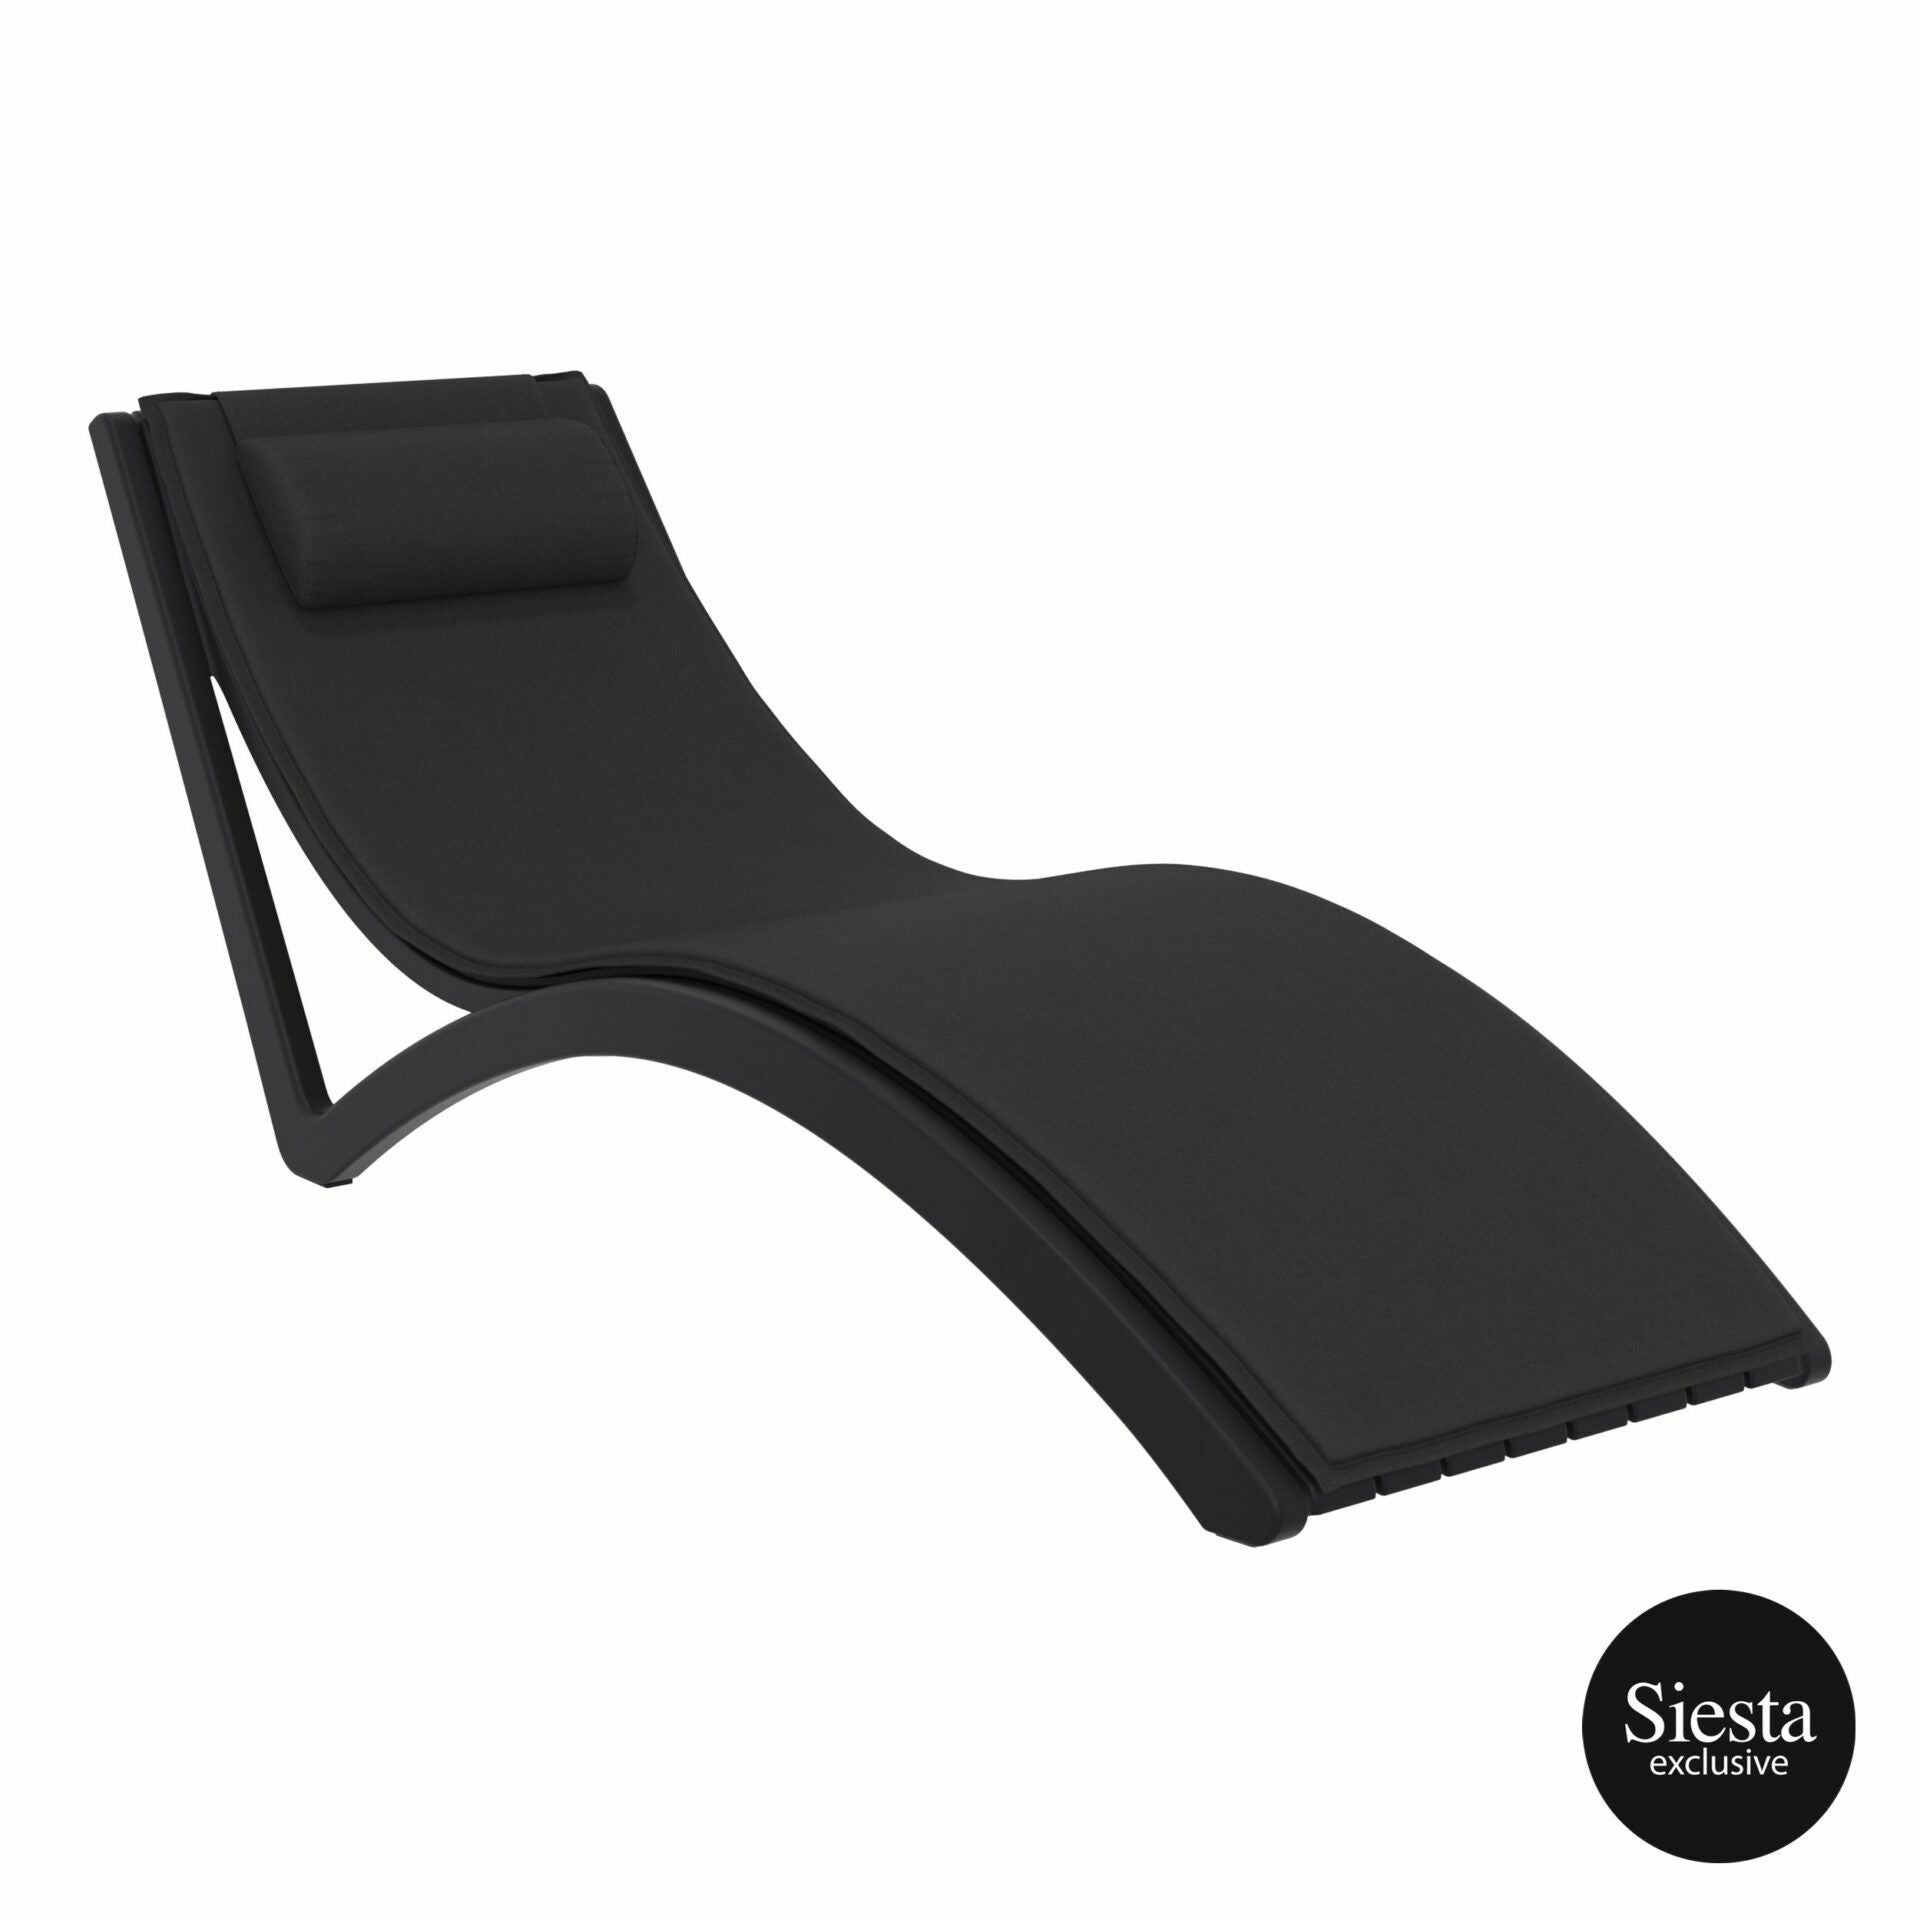 Pool Side 3 Piece Slim Sun Lounger Package with Ocean Side Table - Black with Black Cushion